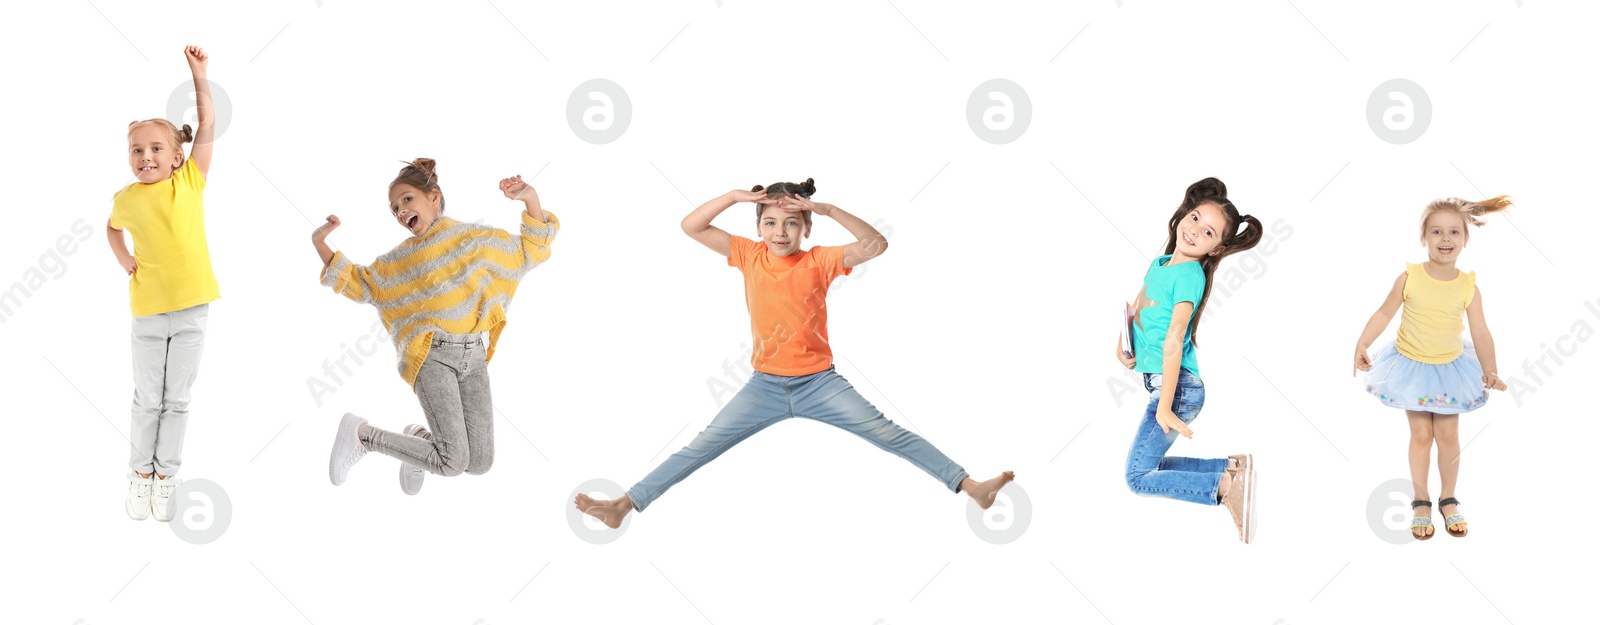 Image of Different kids jumping on white background, collage with photos